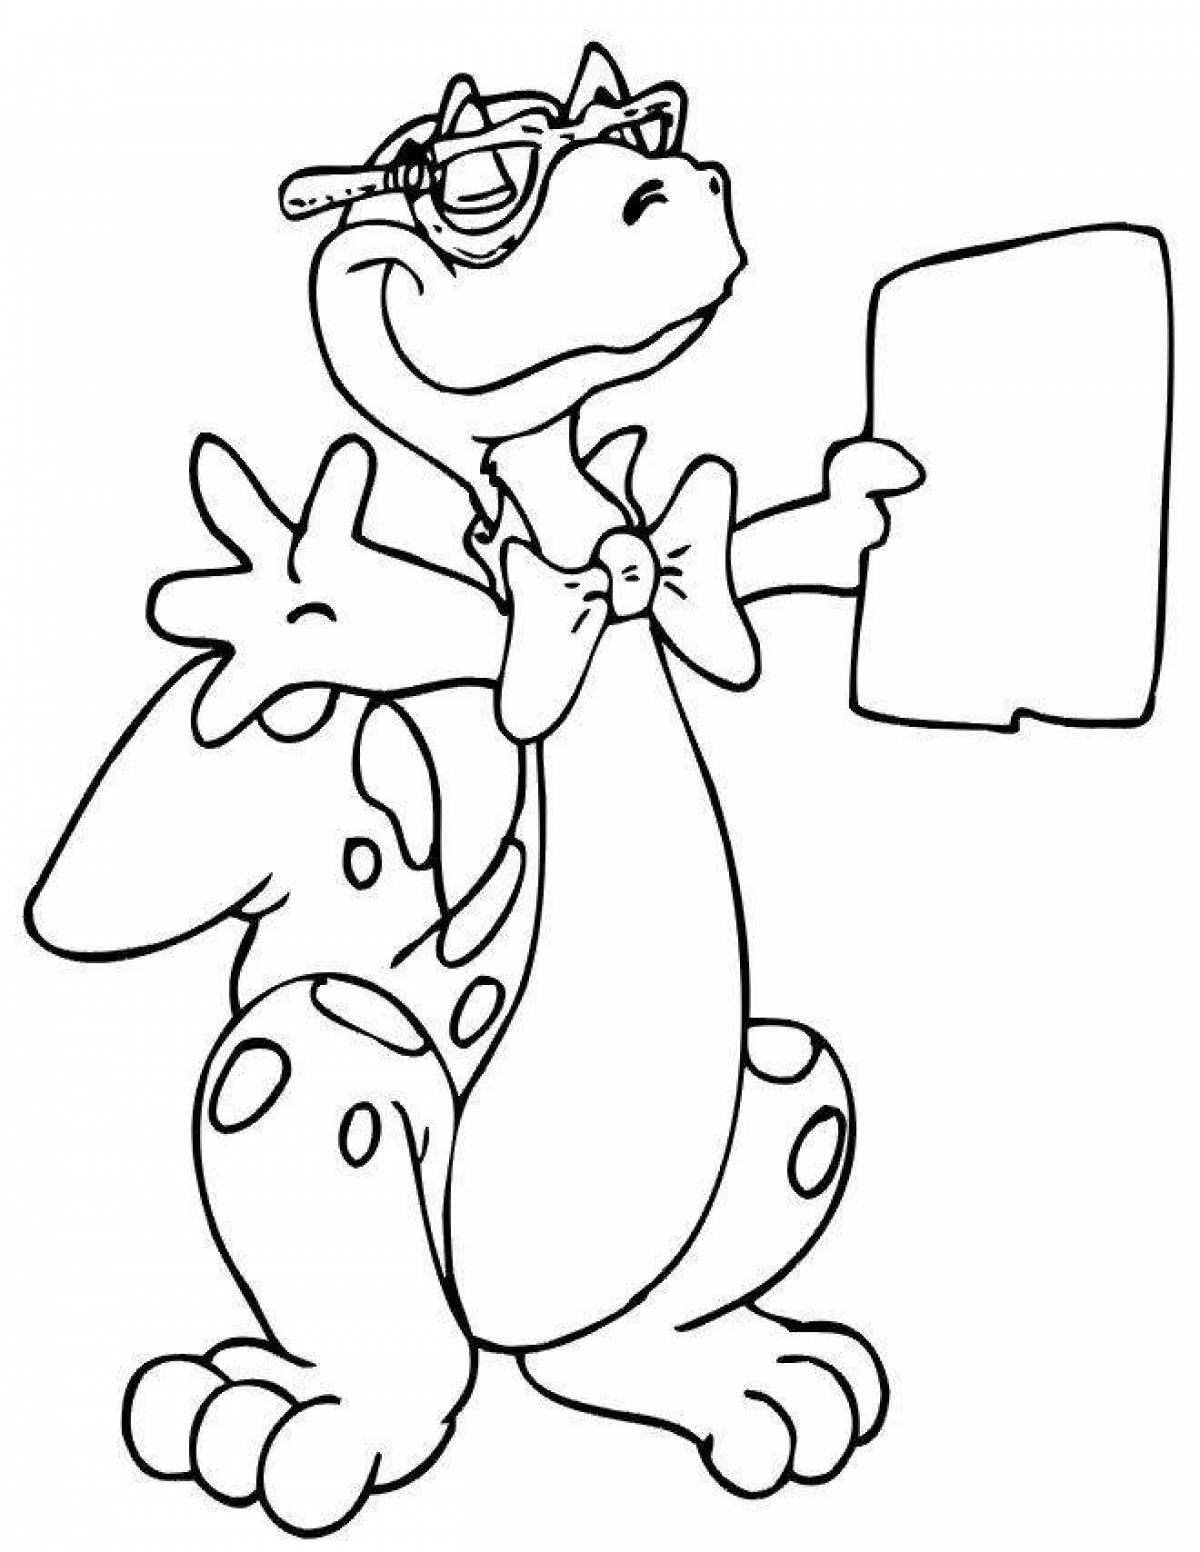 Playful dino coloring page